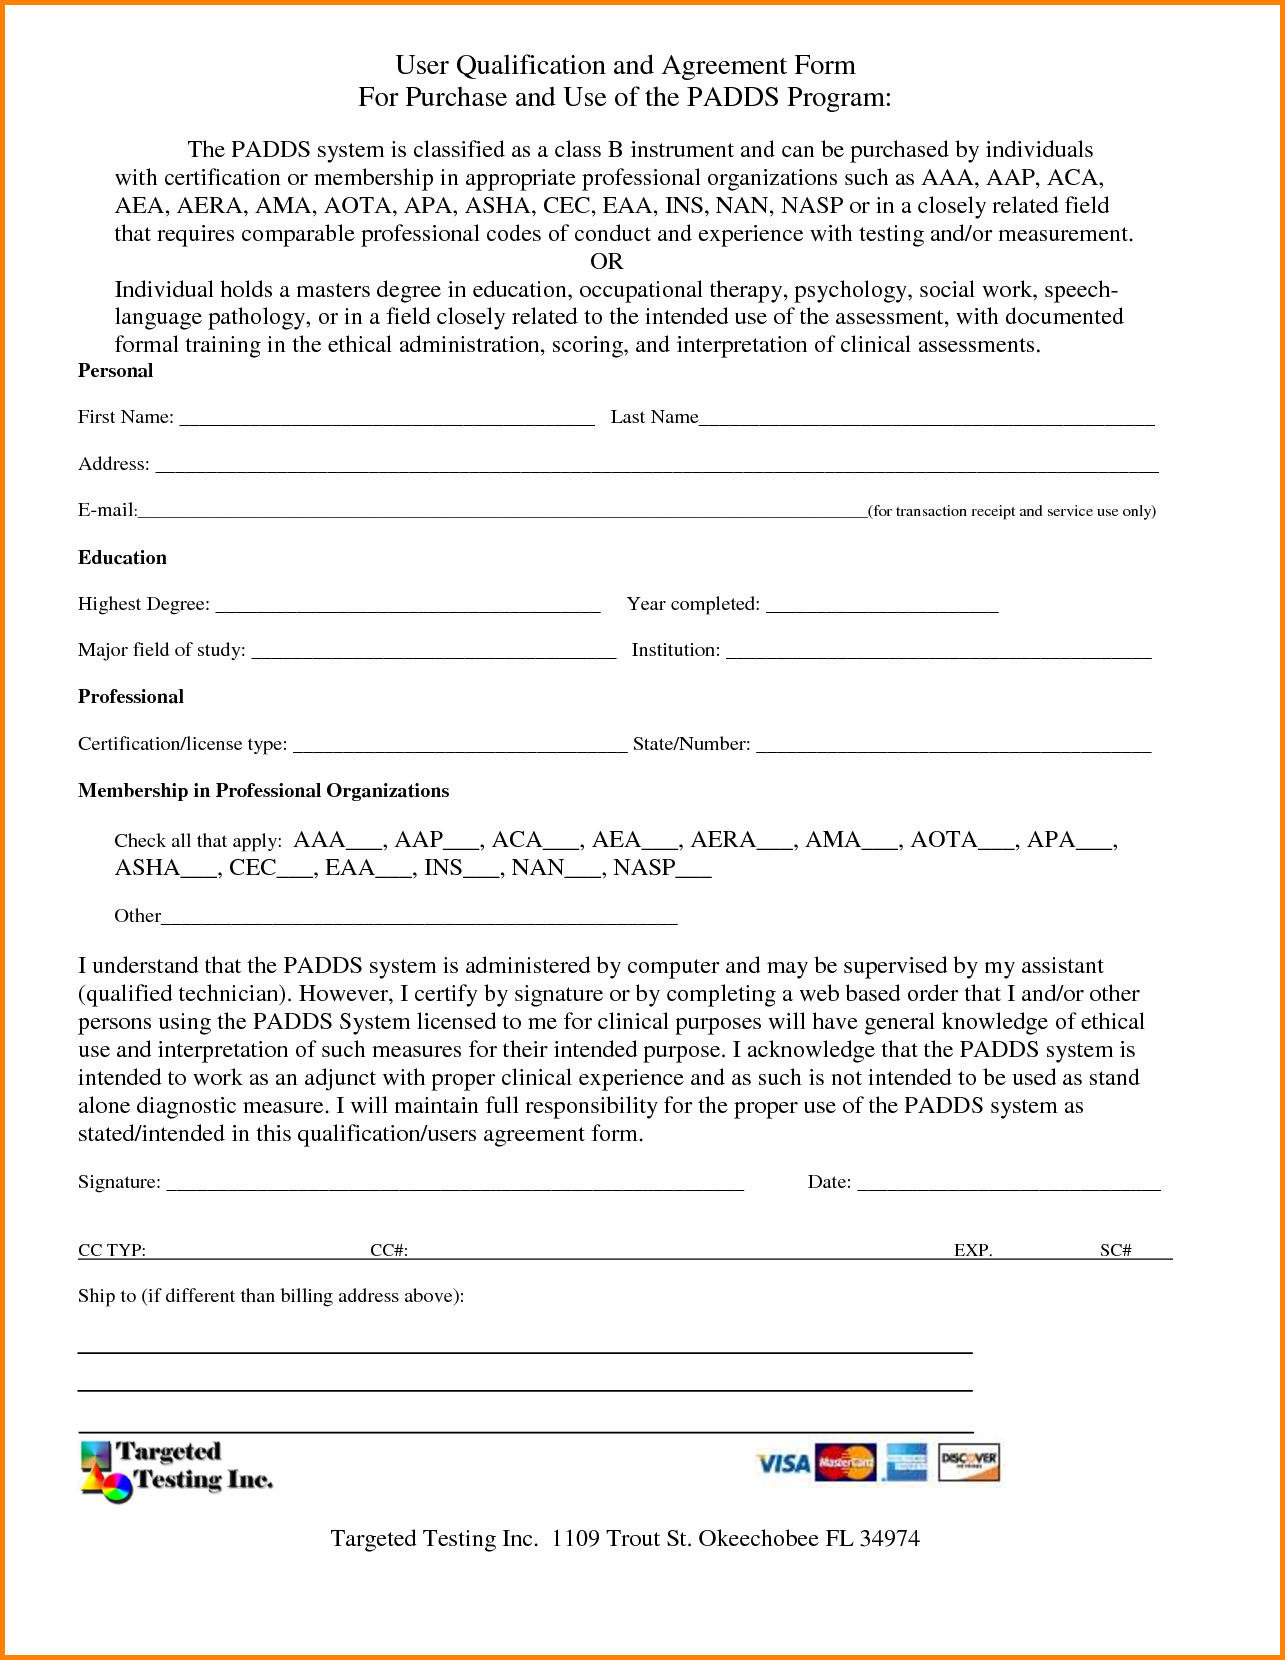 Minnesota Purchase Agreement 015 Home Purchase Agreement Template Ideas Free Memo Templates Image